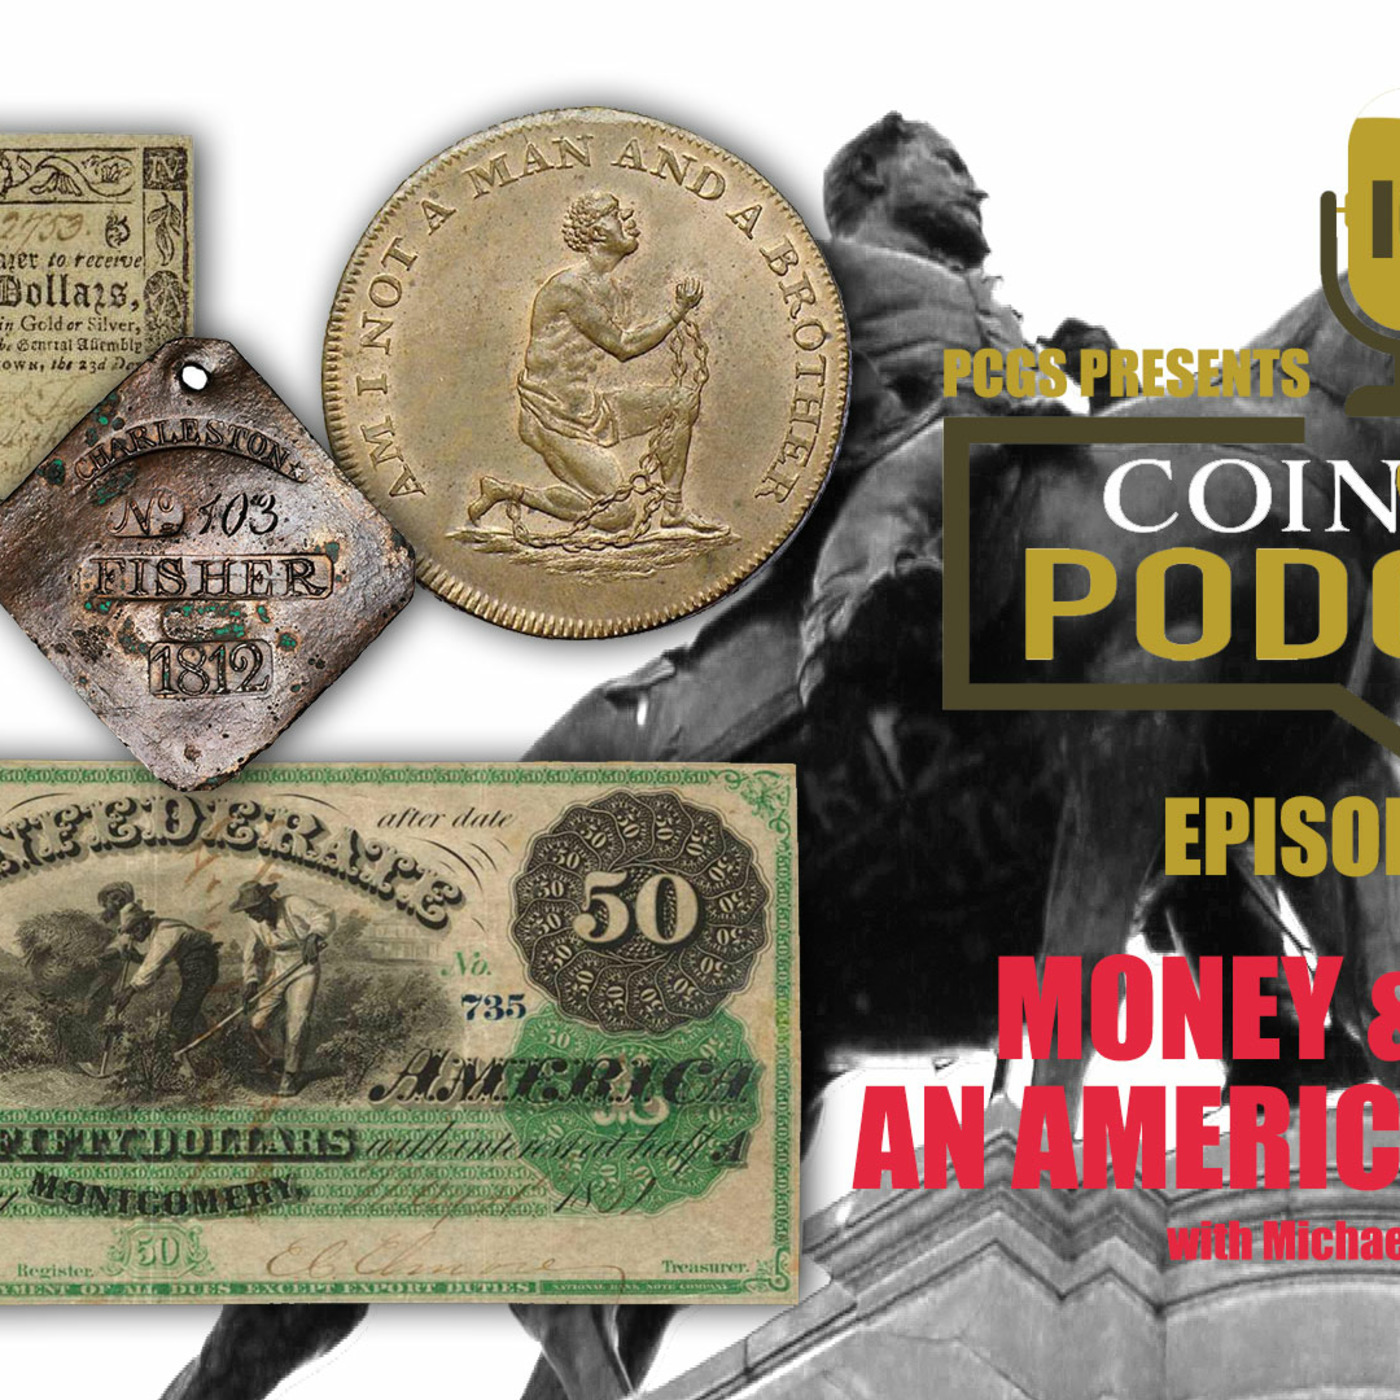 Episode 156: CoinWeek Podcast #156: Money & Race: An American Story